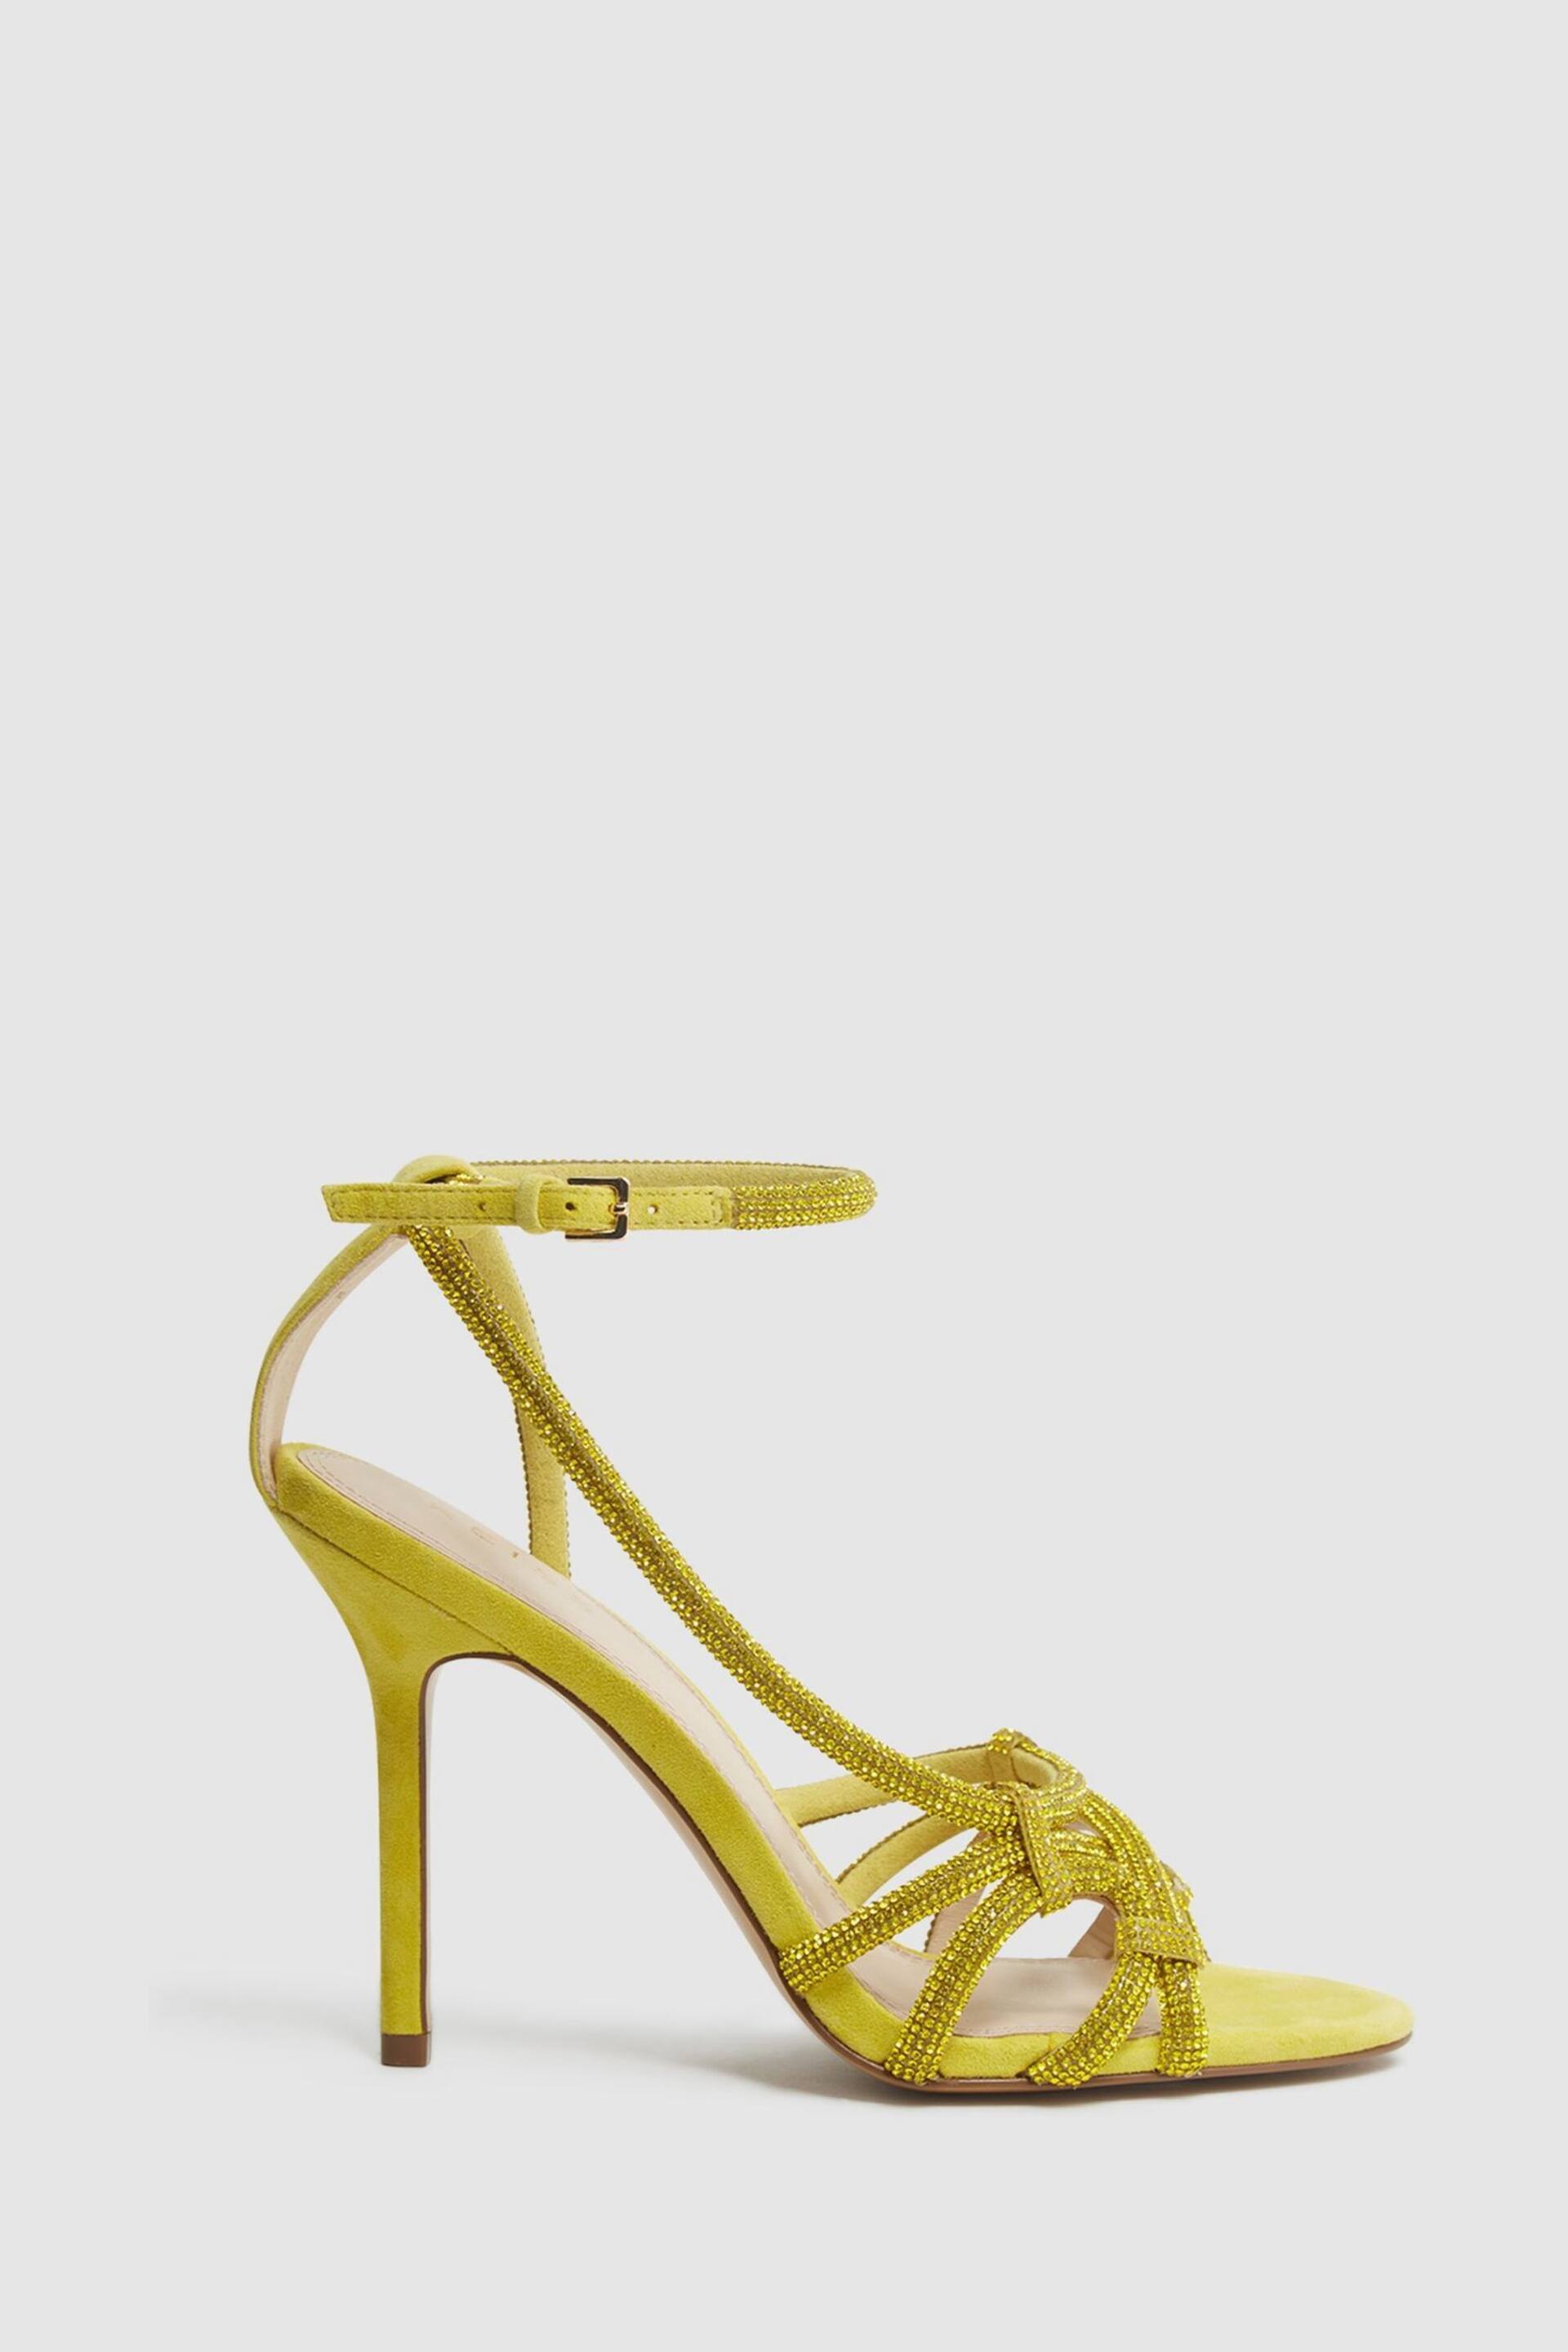 Reiss Yellow Eryn Embellished Heeled Sandals - Image 1 of 6